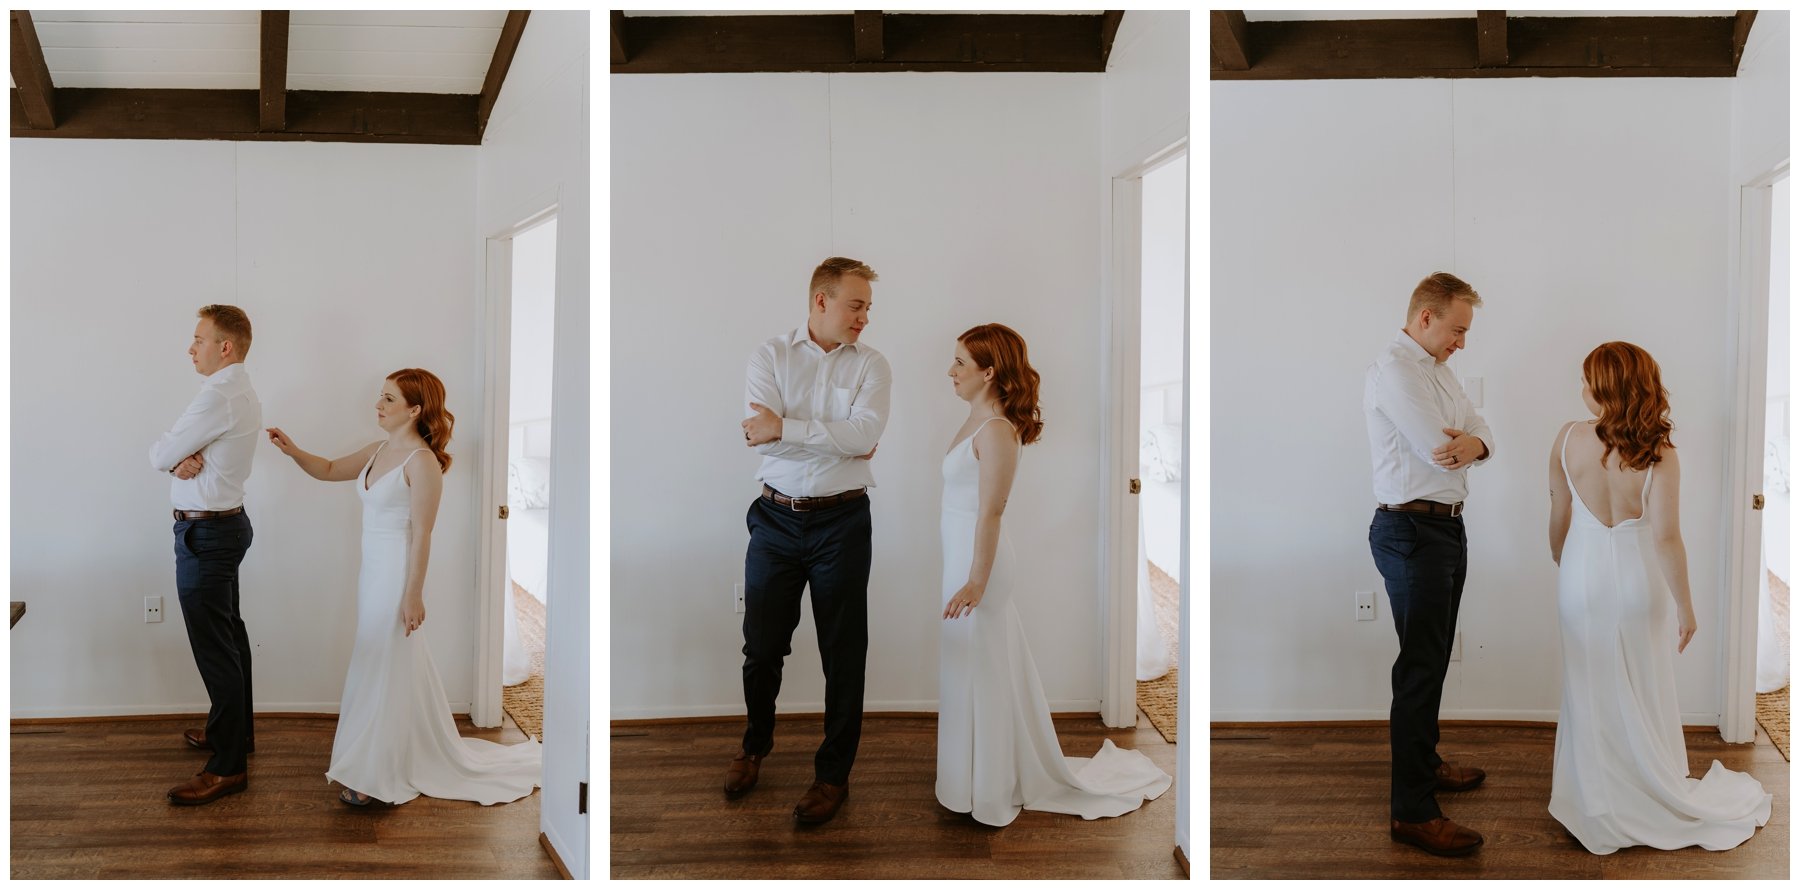 Getting Ready at AirBNB for Texas Beach Elopement | Ashley Medrano Photography | Galveston Texas Beach Elopement | via ashleymedrano.com